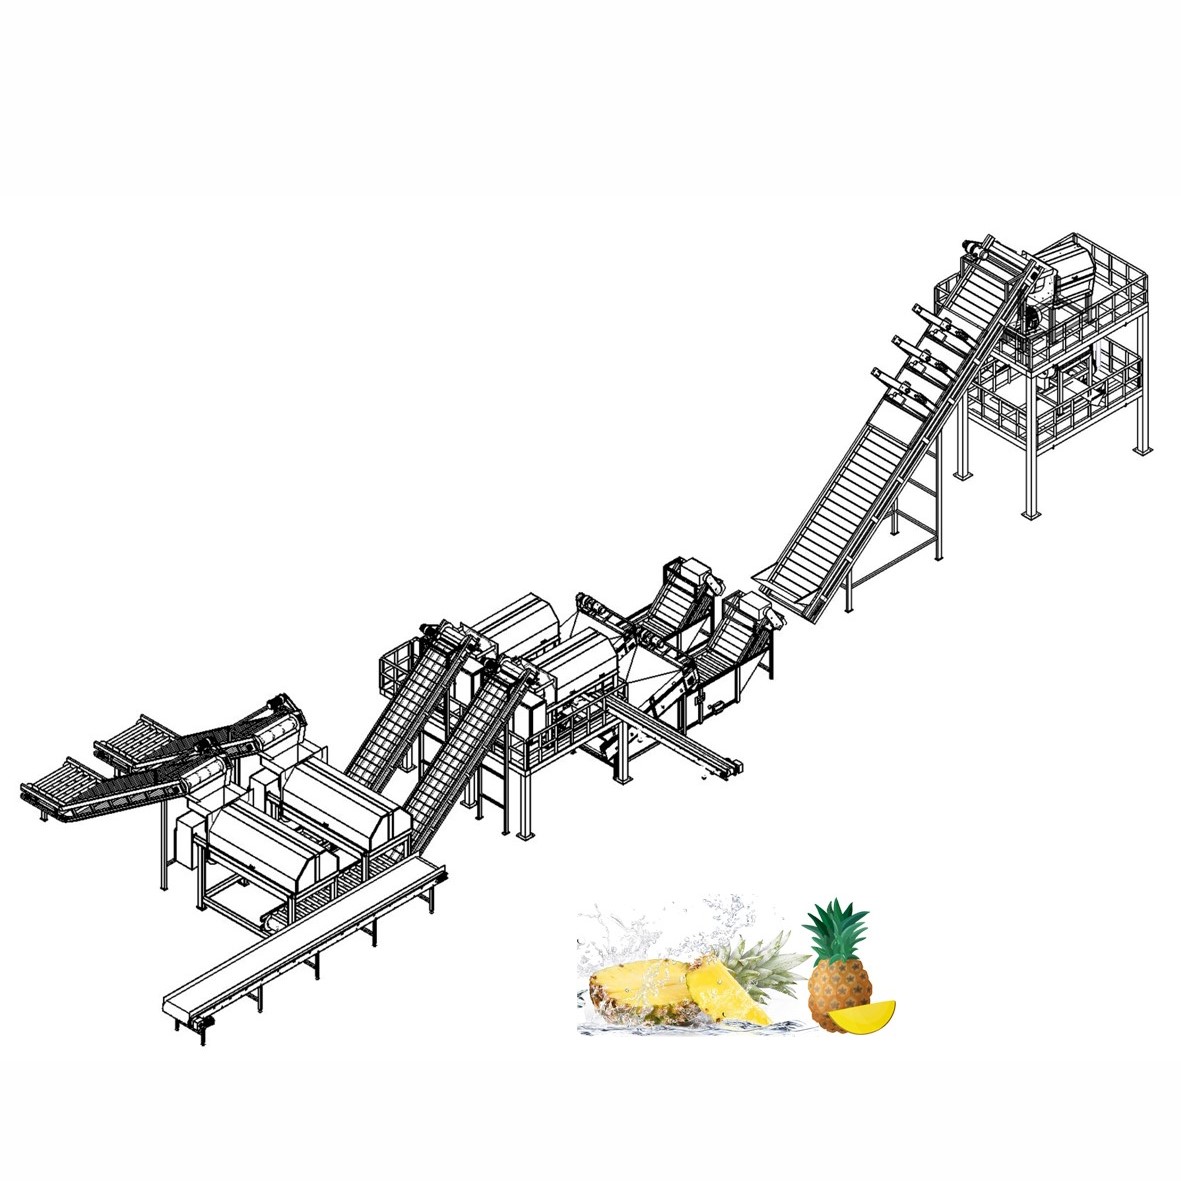 Pineapple Processing Line